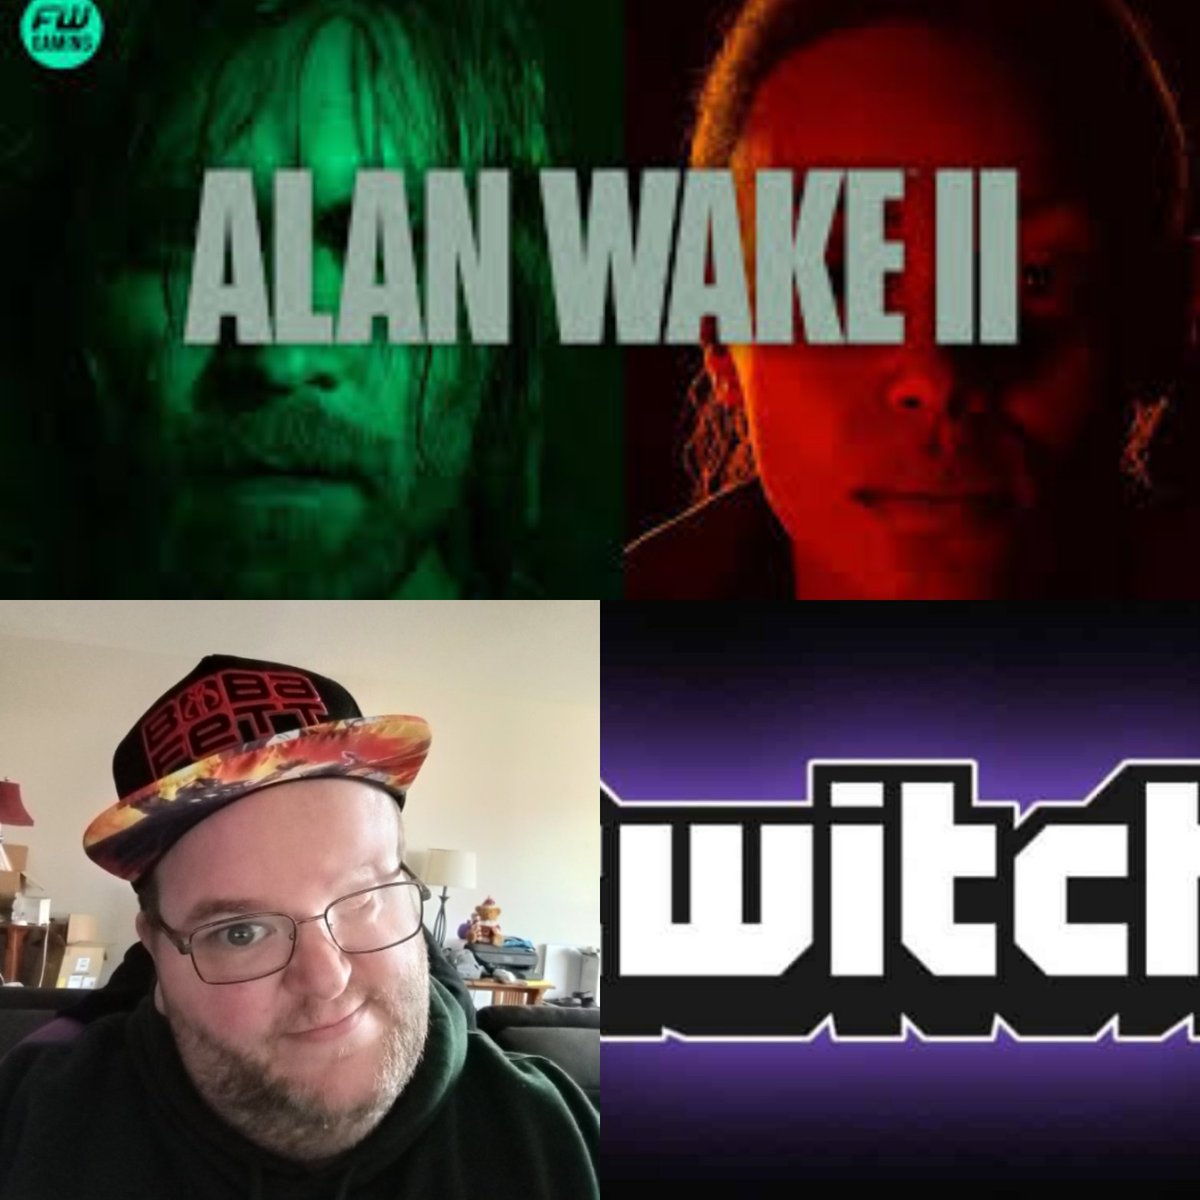 You are #beautiful and don't ever let anyone ever try to convince you otherwise.

Going live w/#AlanWake2 Twitch.tv/CyclopsMuller

#Twitch #Streamer #TwitchAffiliate #PS5 #Horror #Action #Mystery #MentalHealth #Lgbtqia #Ally #FactsOverFeelings #Strong